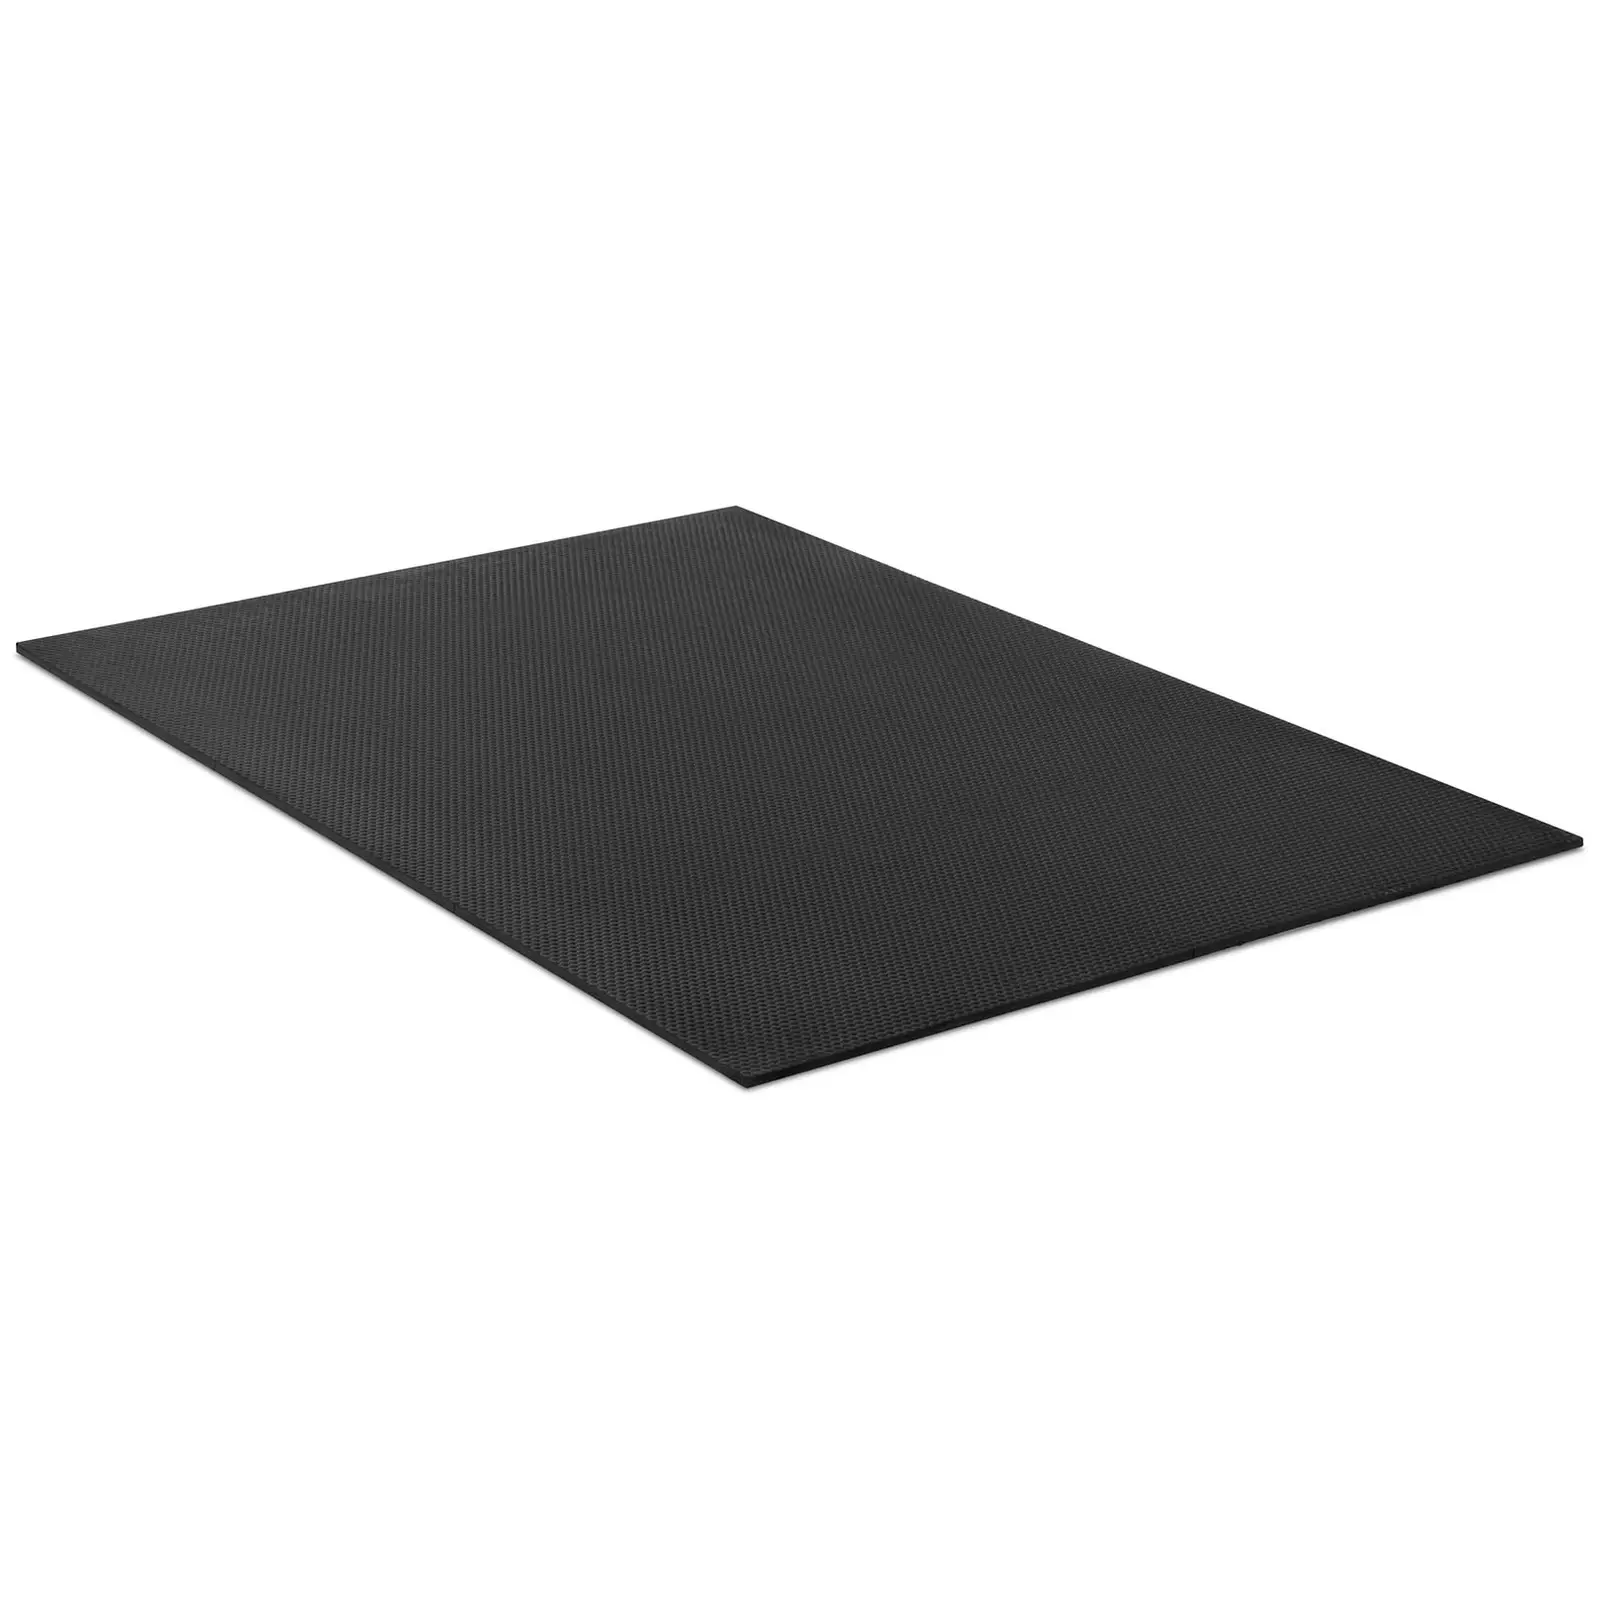 Stall Mat - with drainage grooves - 1830 x 1220 x 13 mm - NR, Recycled Rubber